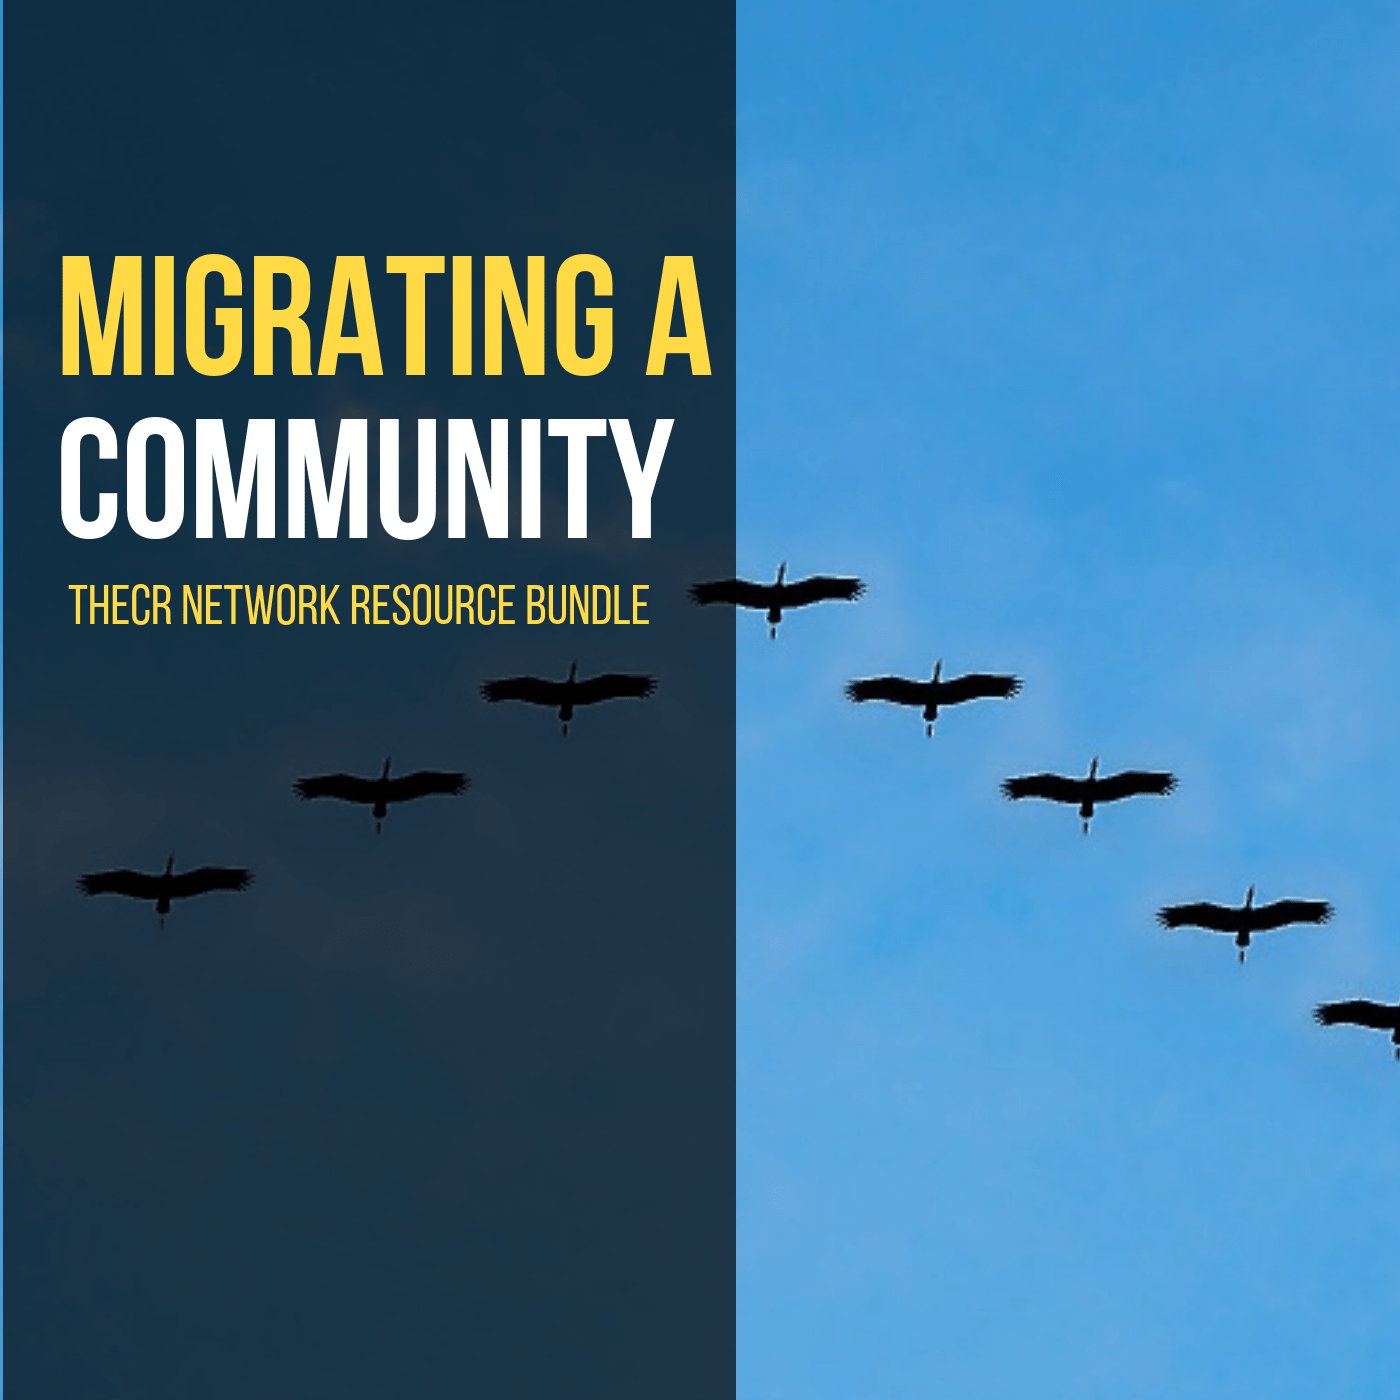 How to migrate from one community platform to another